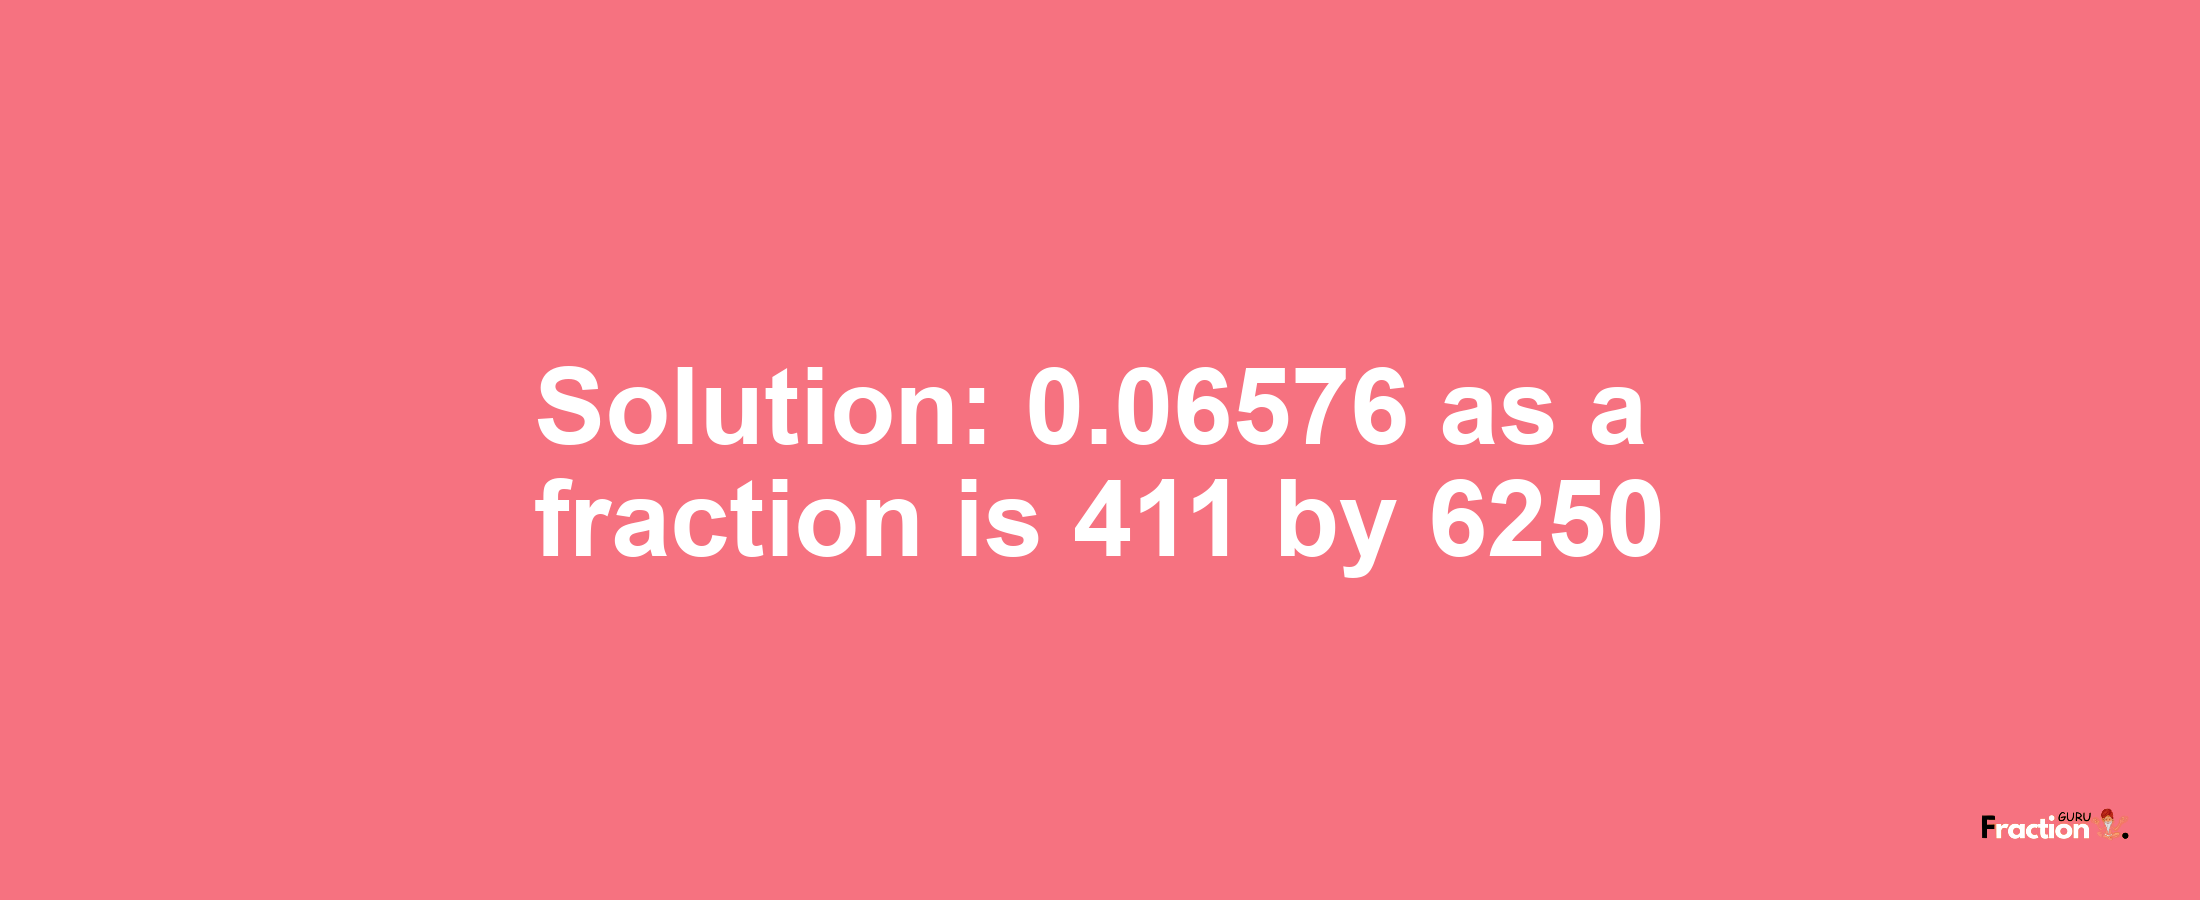 Solution:0.06576 as a fraction is 411/6250